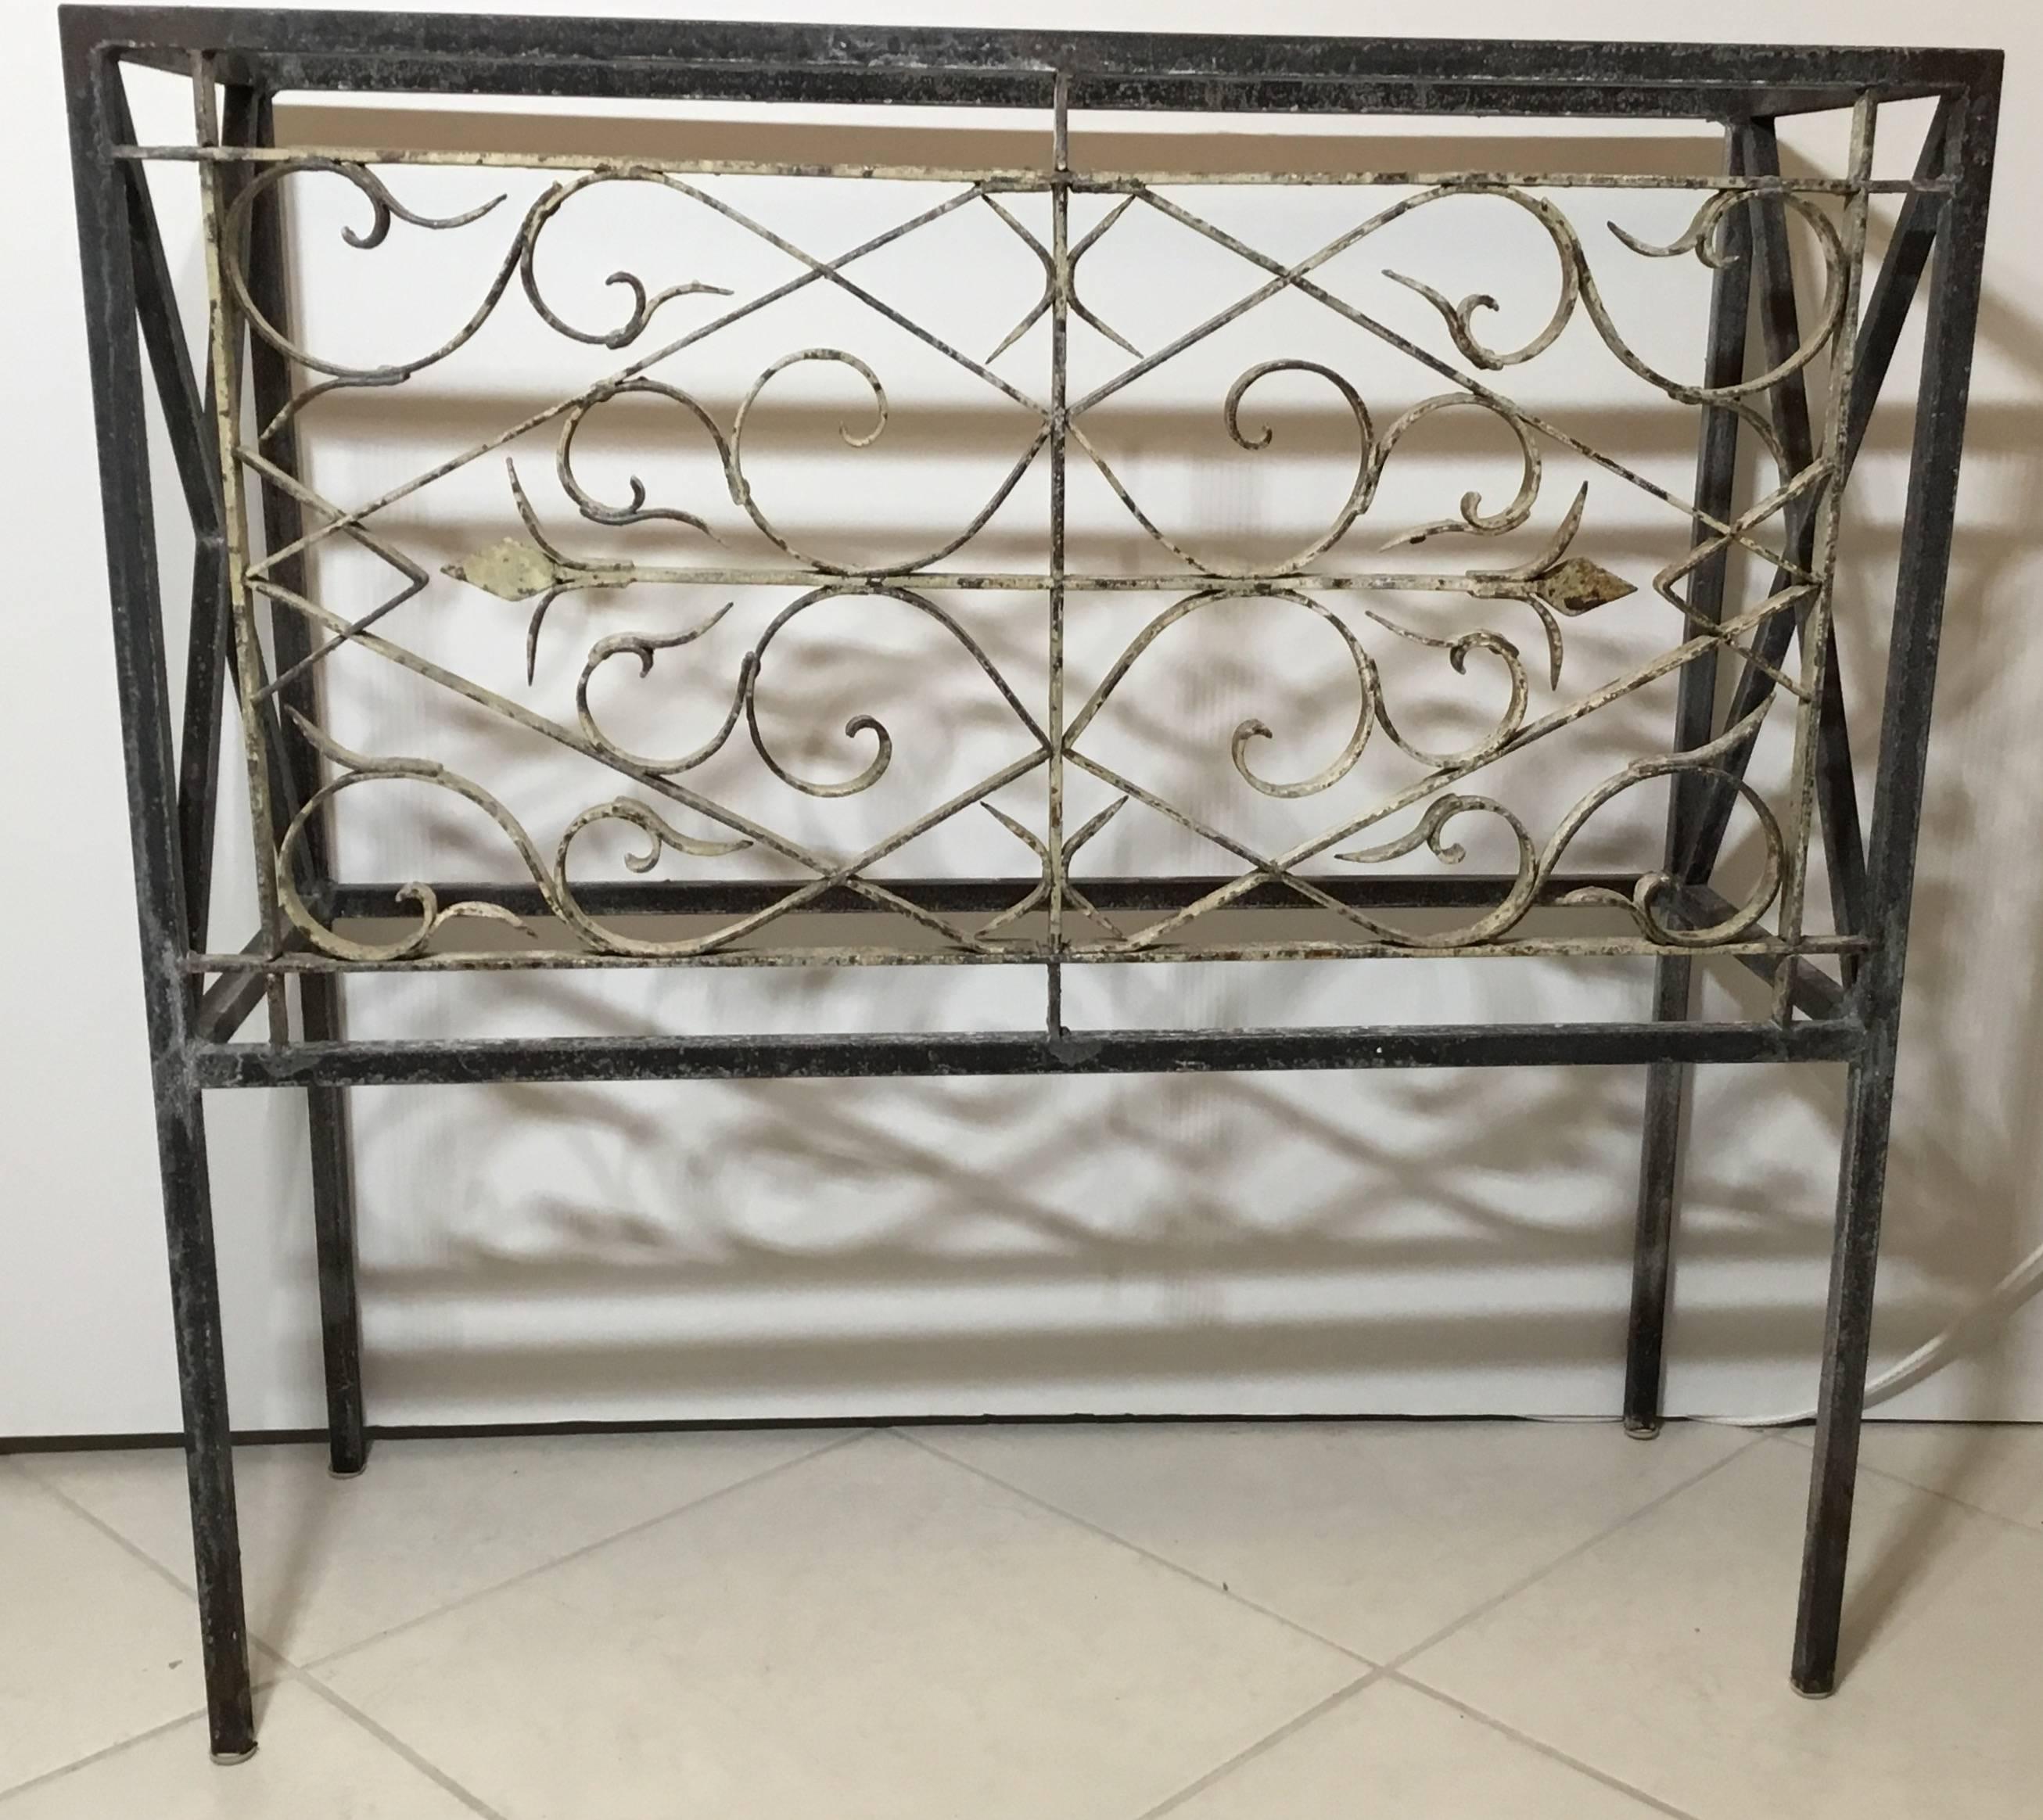 Elegant console made of antique hand-forged iron front with neoclassical style four legs frame.
Will look great with glass top or marble.
Glass or marble-top are not included 